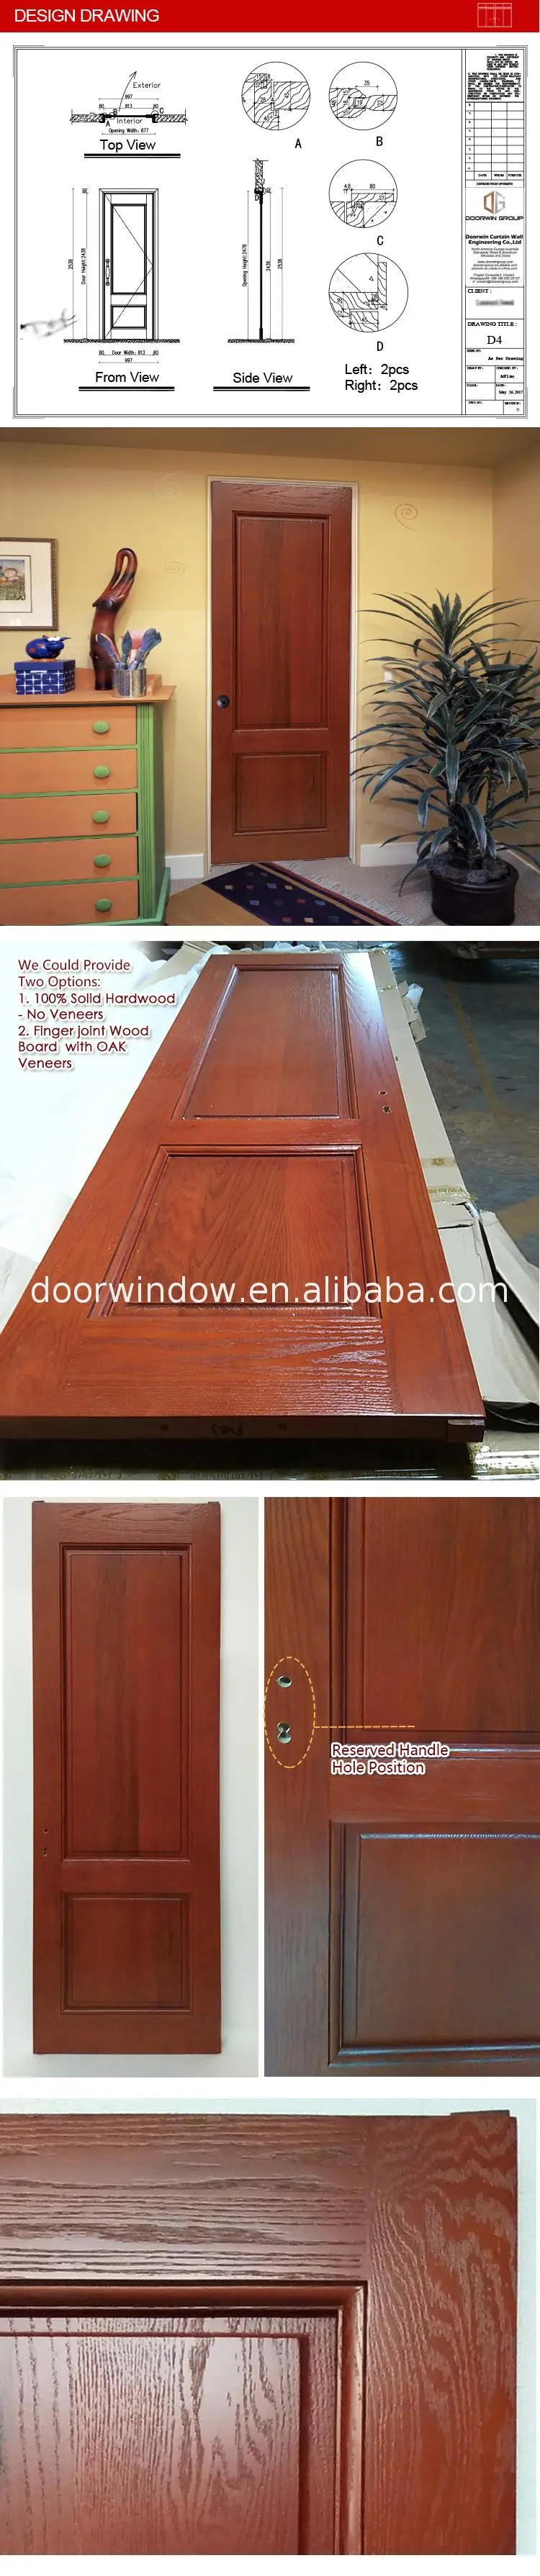 Wooden sash profiles for doors and windows arc interiors wood entry image